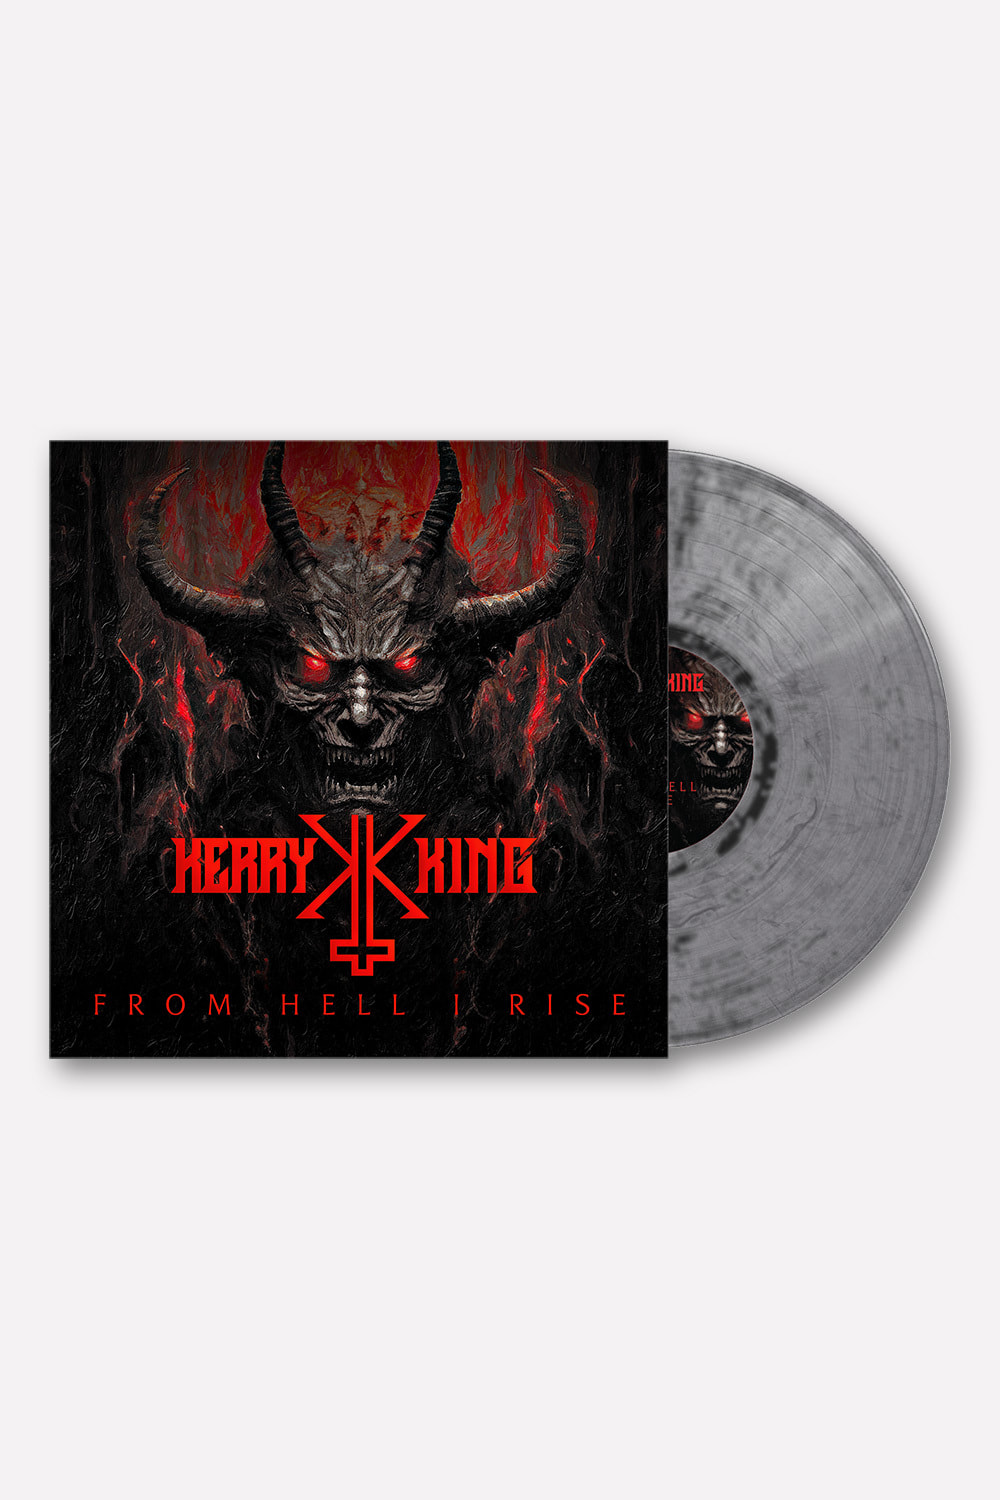 Kerry King - From Hell I Rise. SILVER/BLACK MARBLED VINYL 